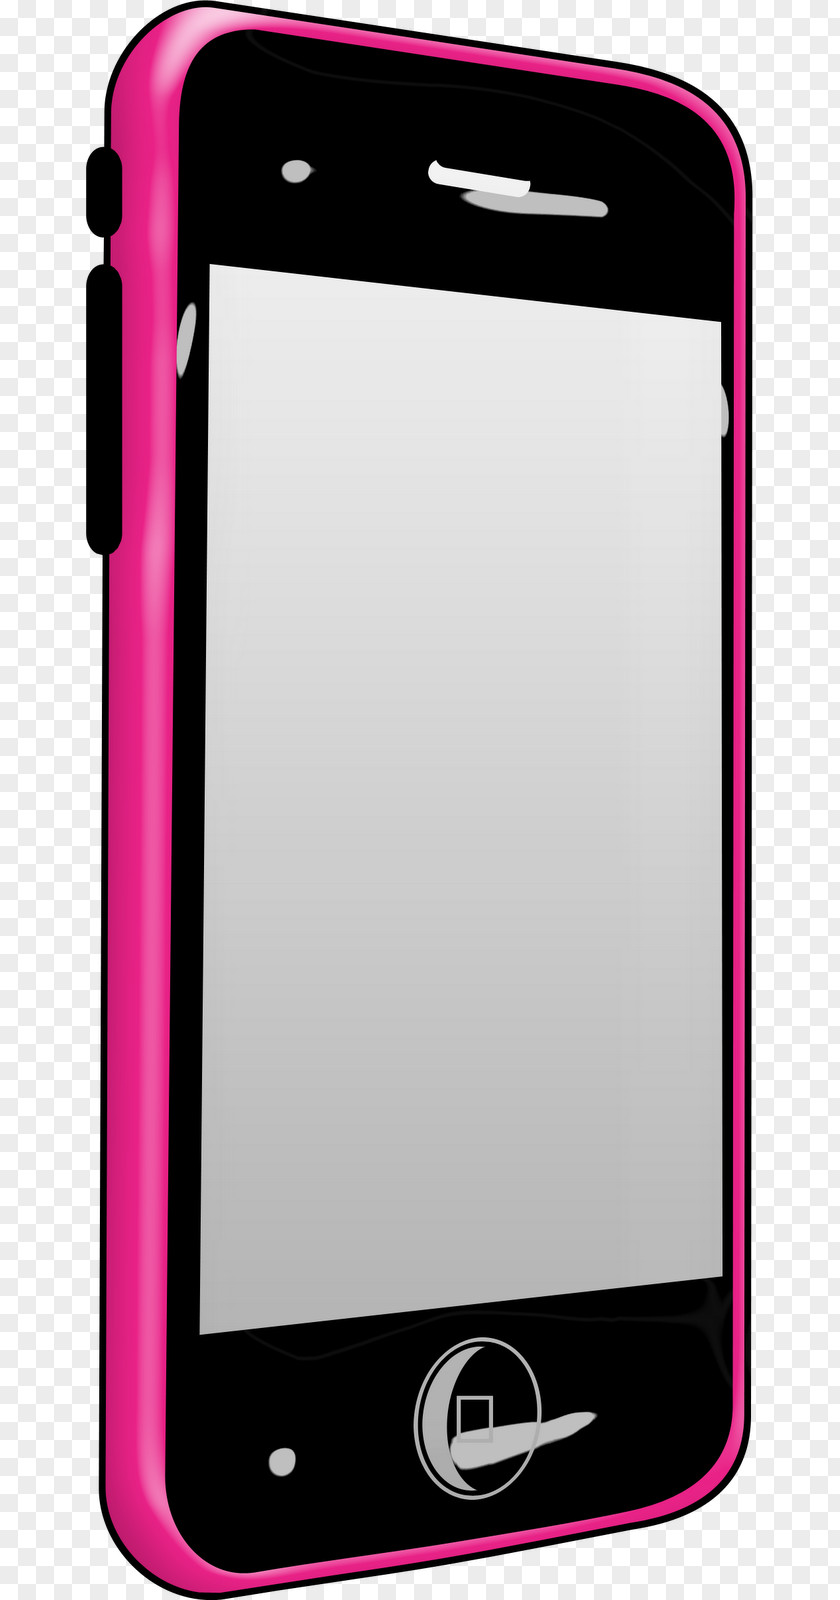 Phone Pink Feature Mobile Accessories Handheld Devices Cellular Network PNG